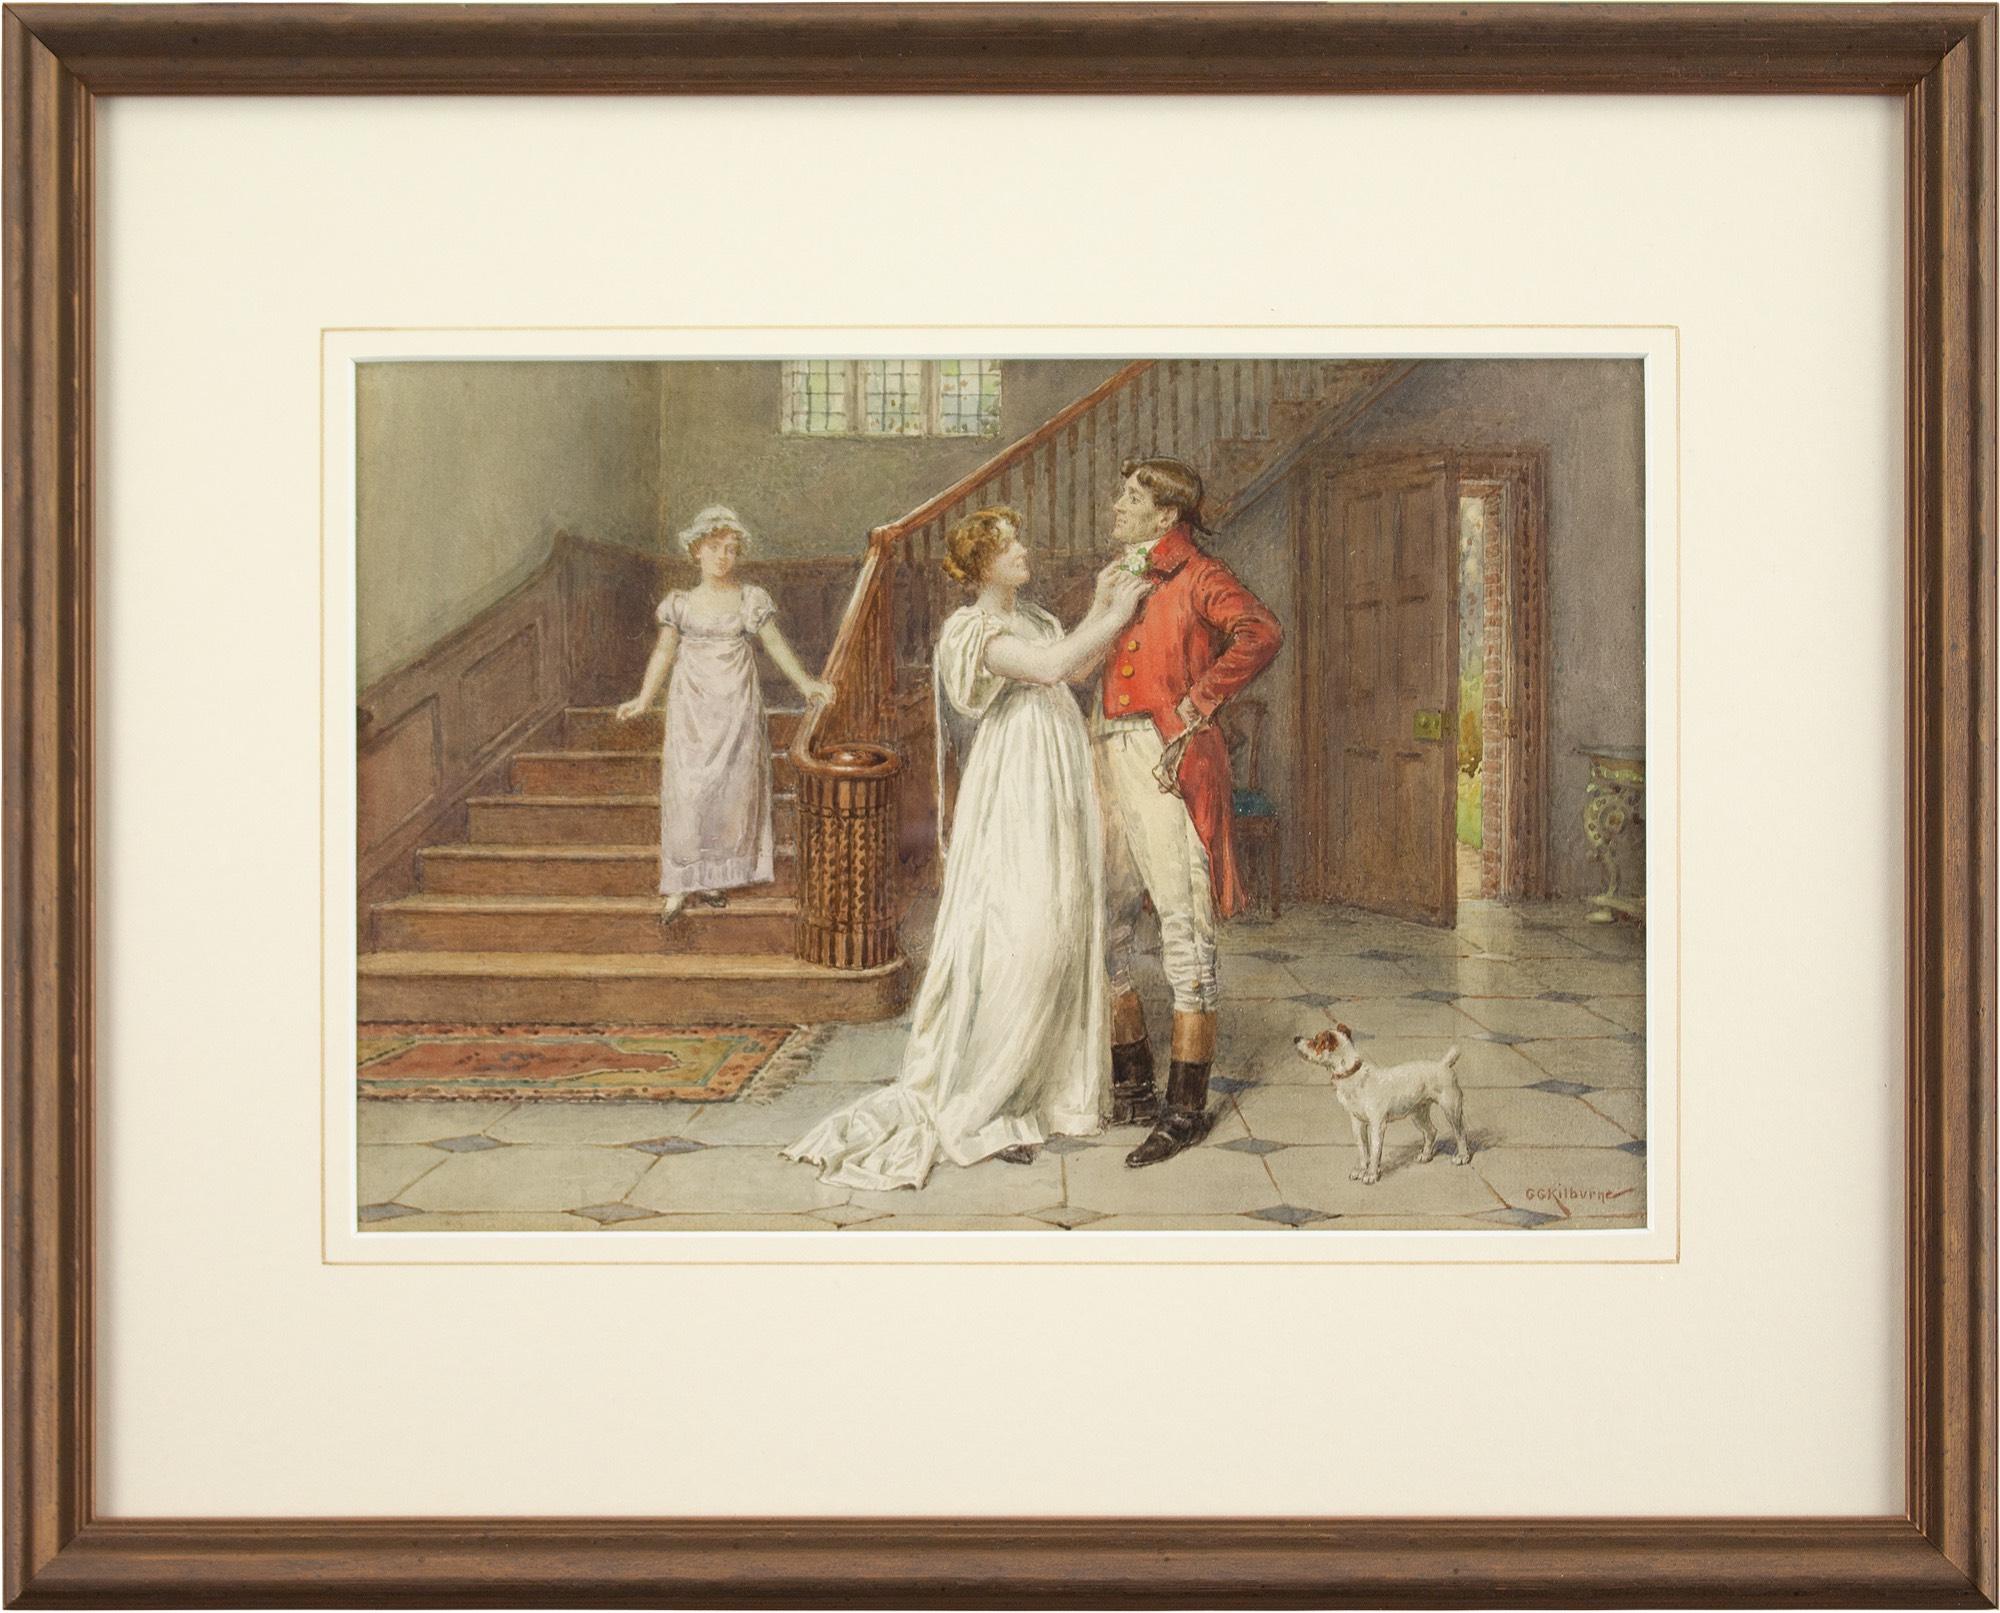 This early 20th-century watercolour by British artist George Goodwin Kilburne (1845-1932) depicts a loving scene from the early 19th century. With her daughter looking on, mother adjusts father’s buttonhole flower, which appears to be a white rose.